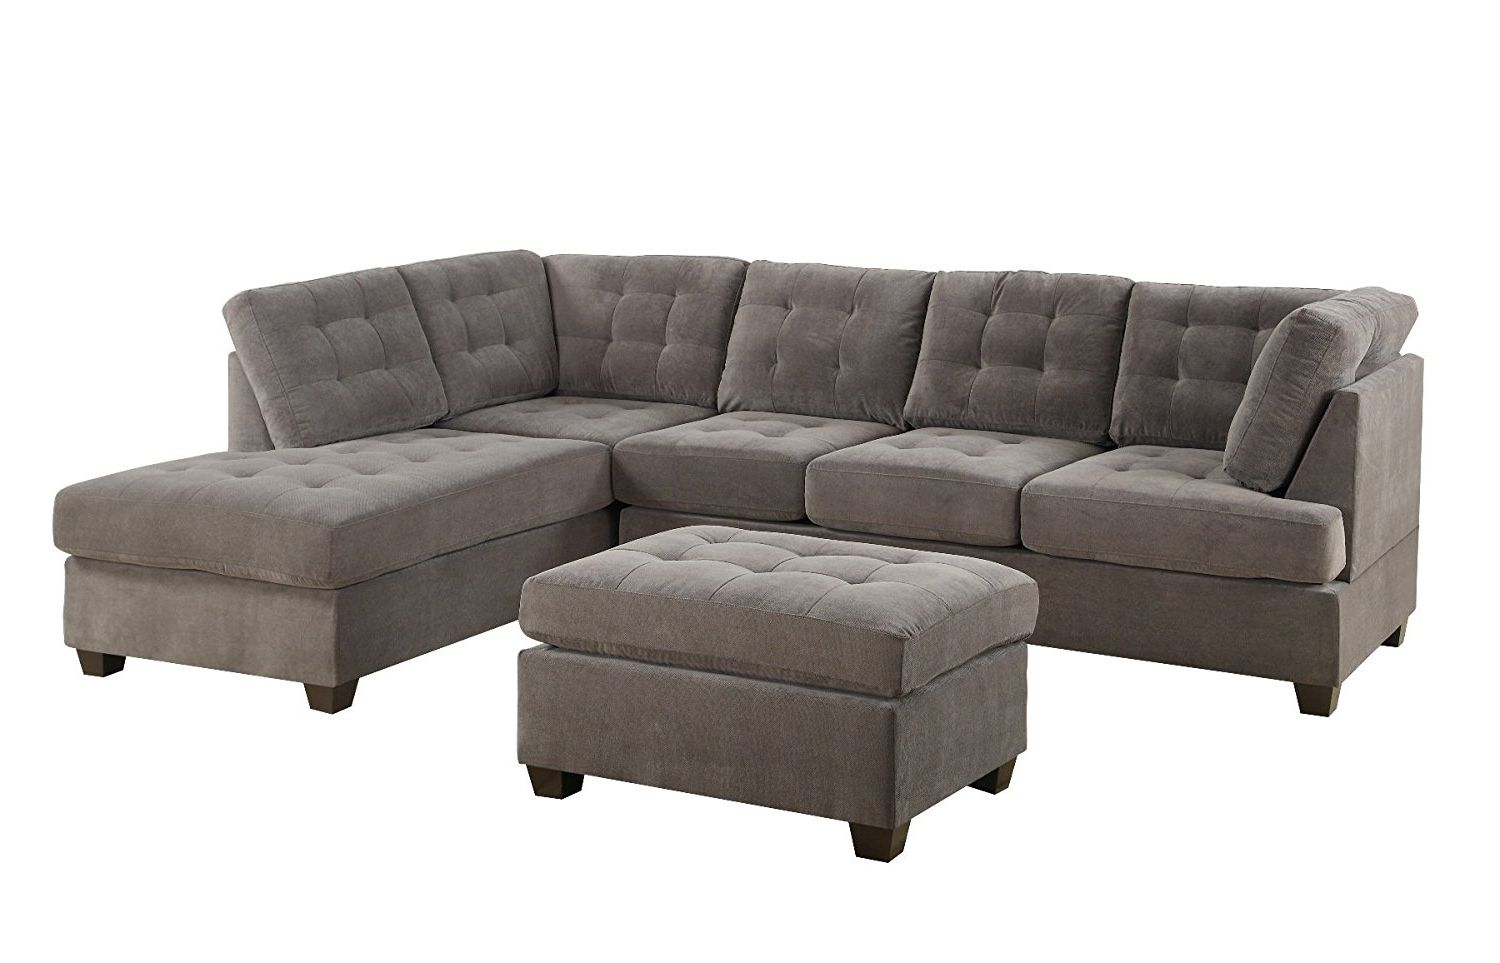 Trendy Amazon: Bobkona Michelson 3 Pieces Reversible Sectional Inside Chaise Loveseats (View 15 of 15)